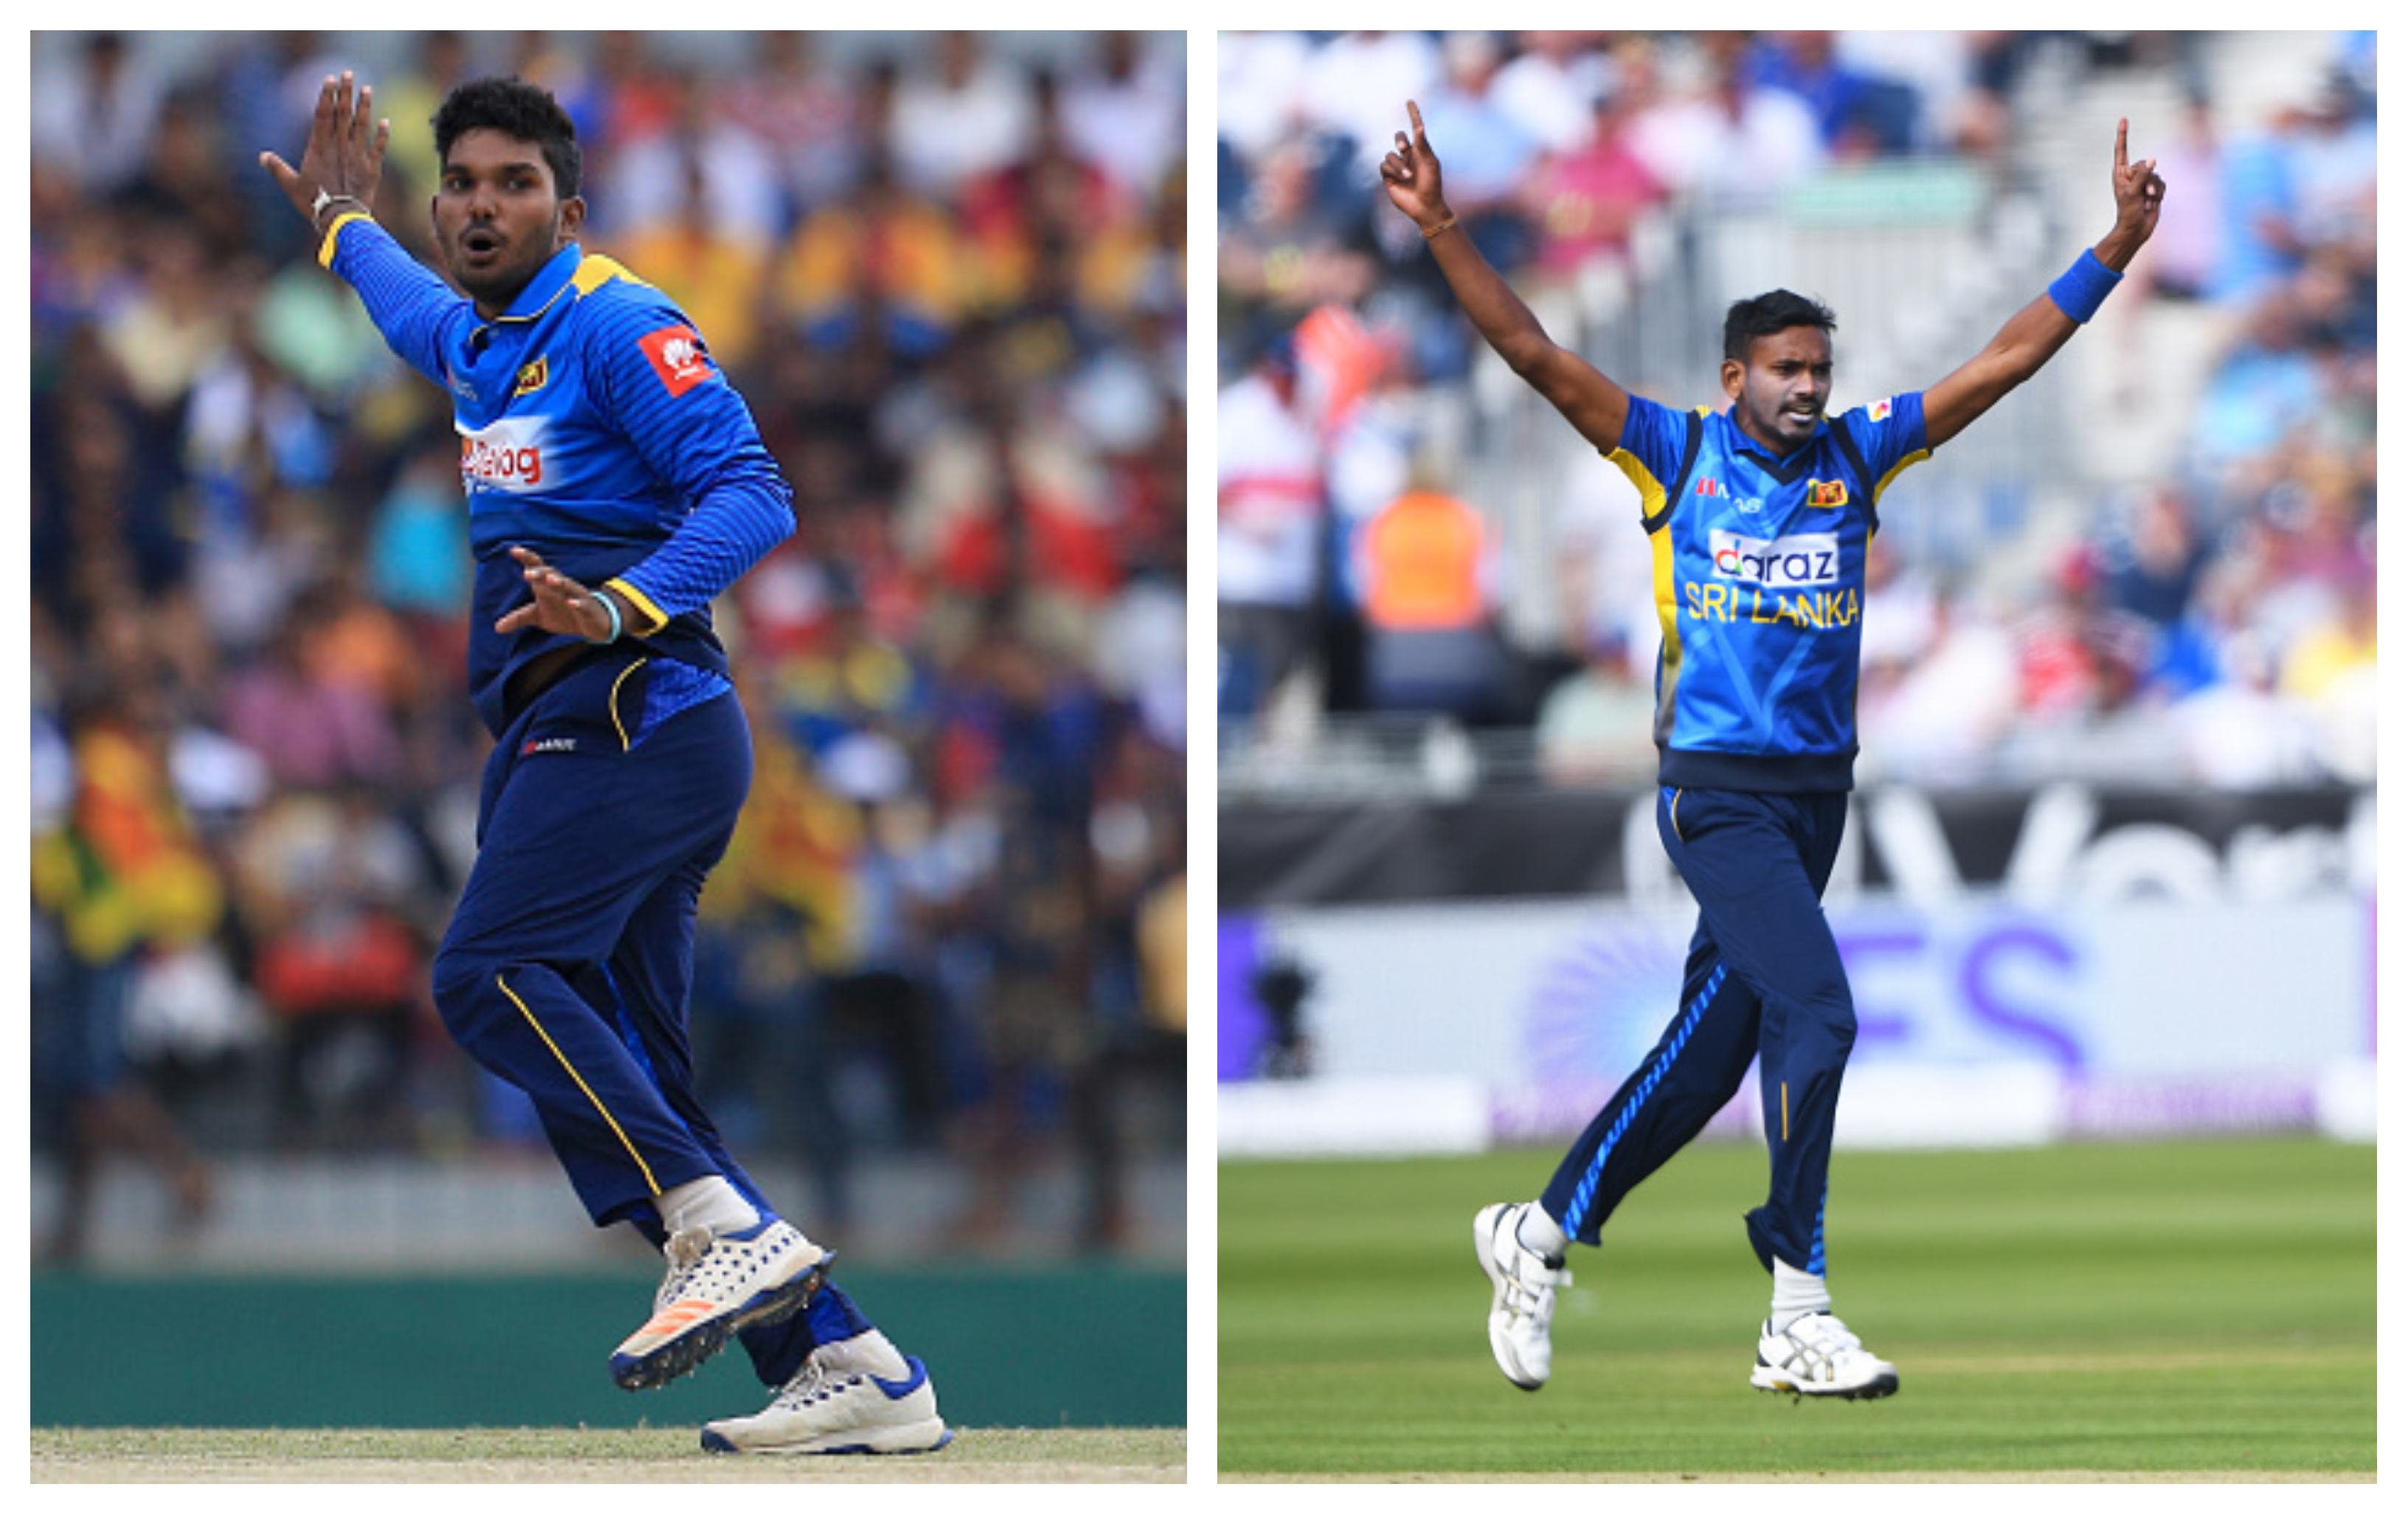 Wanidu Hasaranga and Dushmantha Chameera will play for RCB in the remainder of IPL 2021 | Getty